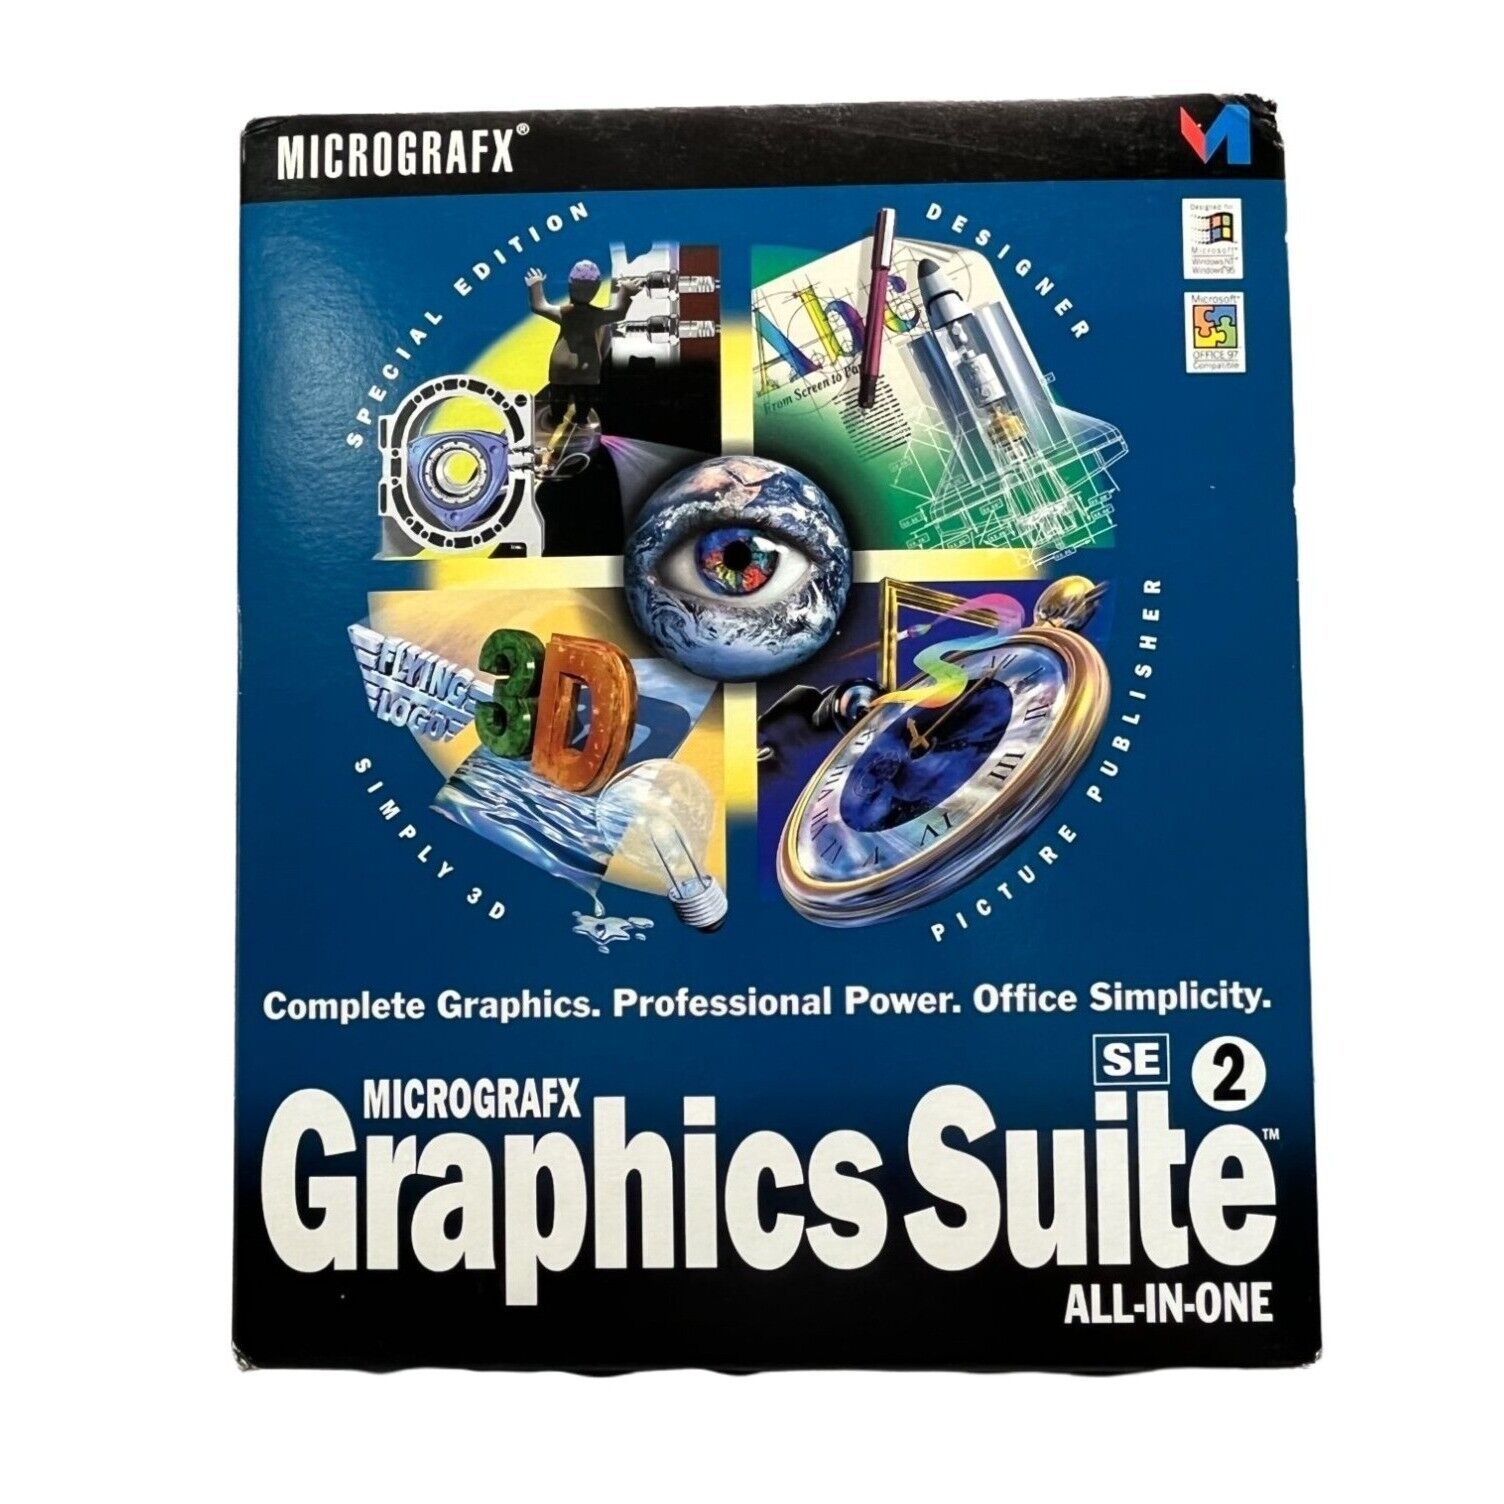 Micrografx Graphics Suite 2 Windows 95/NT Office 97 Compatible NEW SEALED